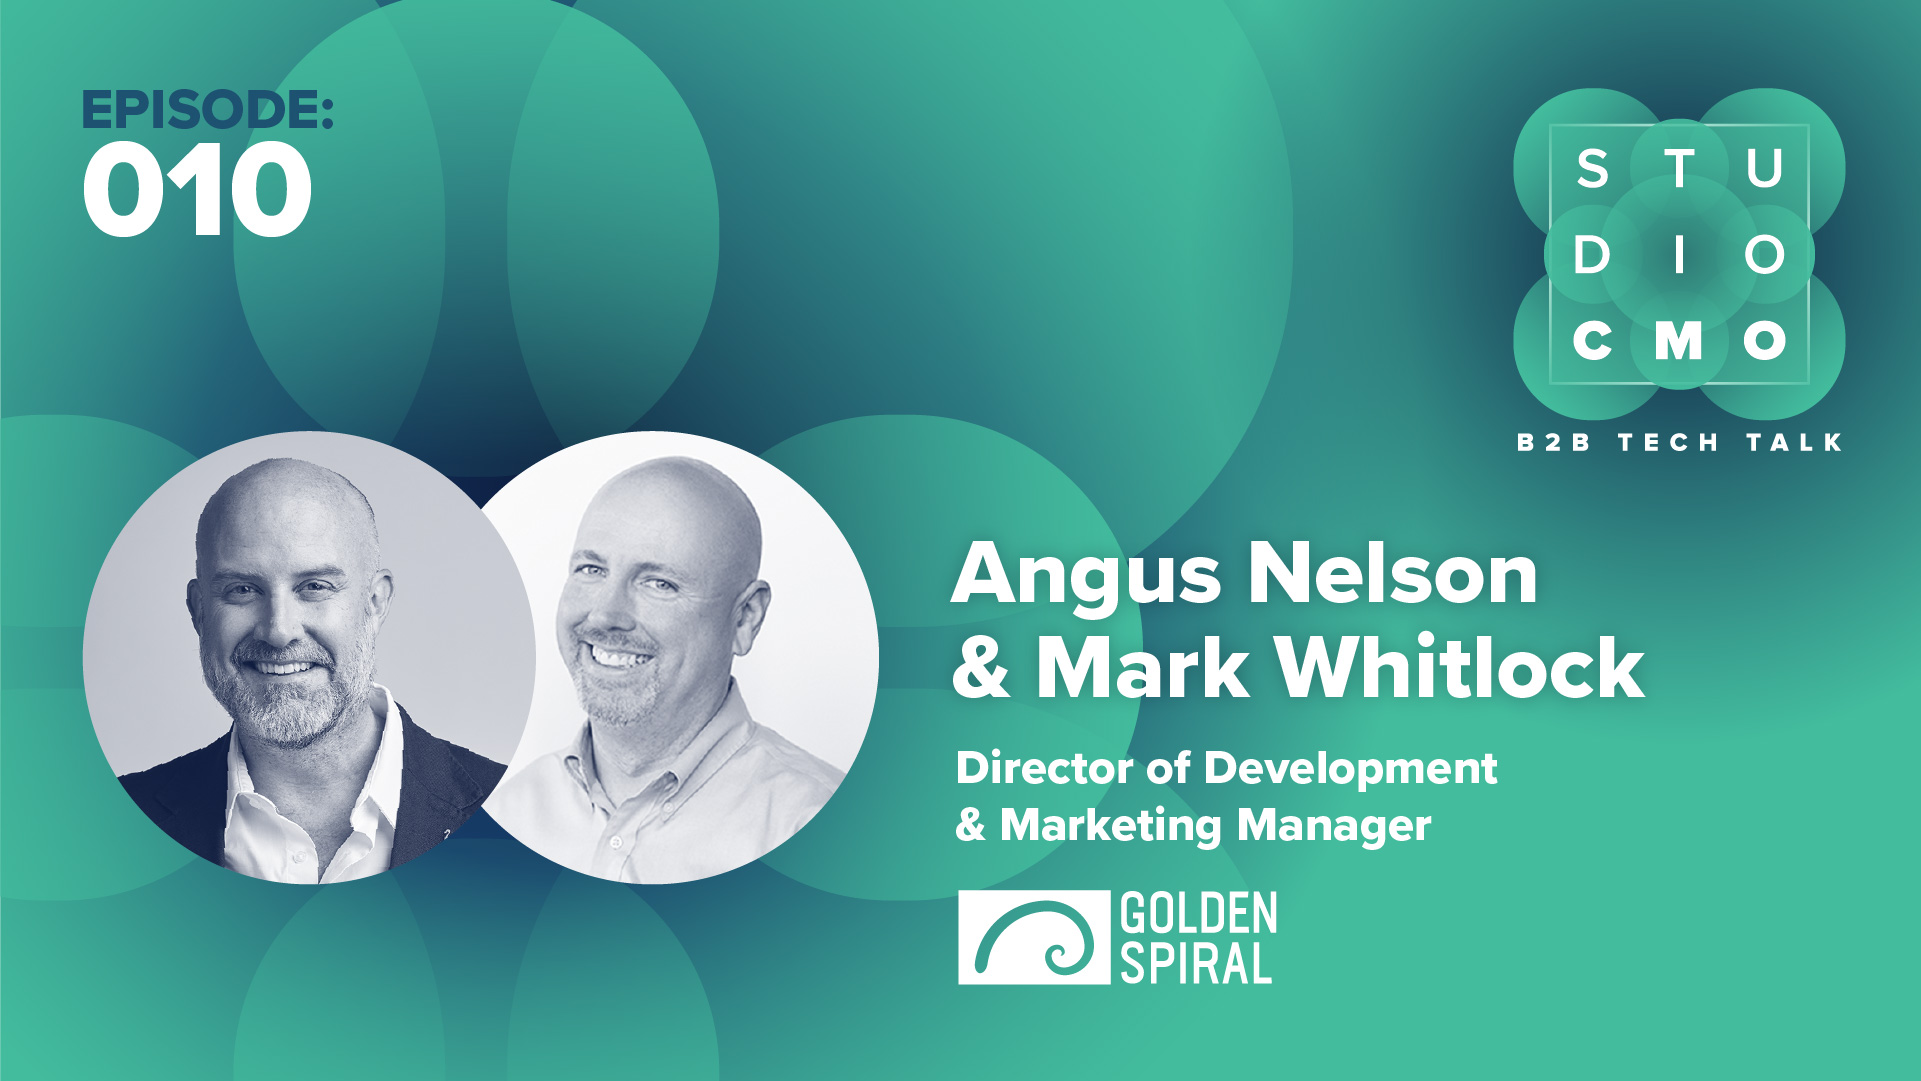 Mark Whitlock Angus Nelson Business Insights podcast studio cmo